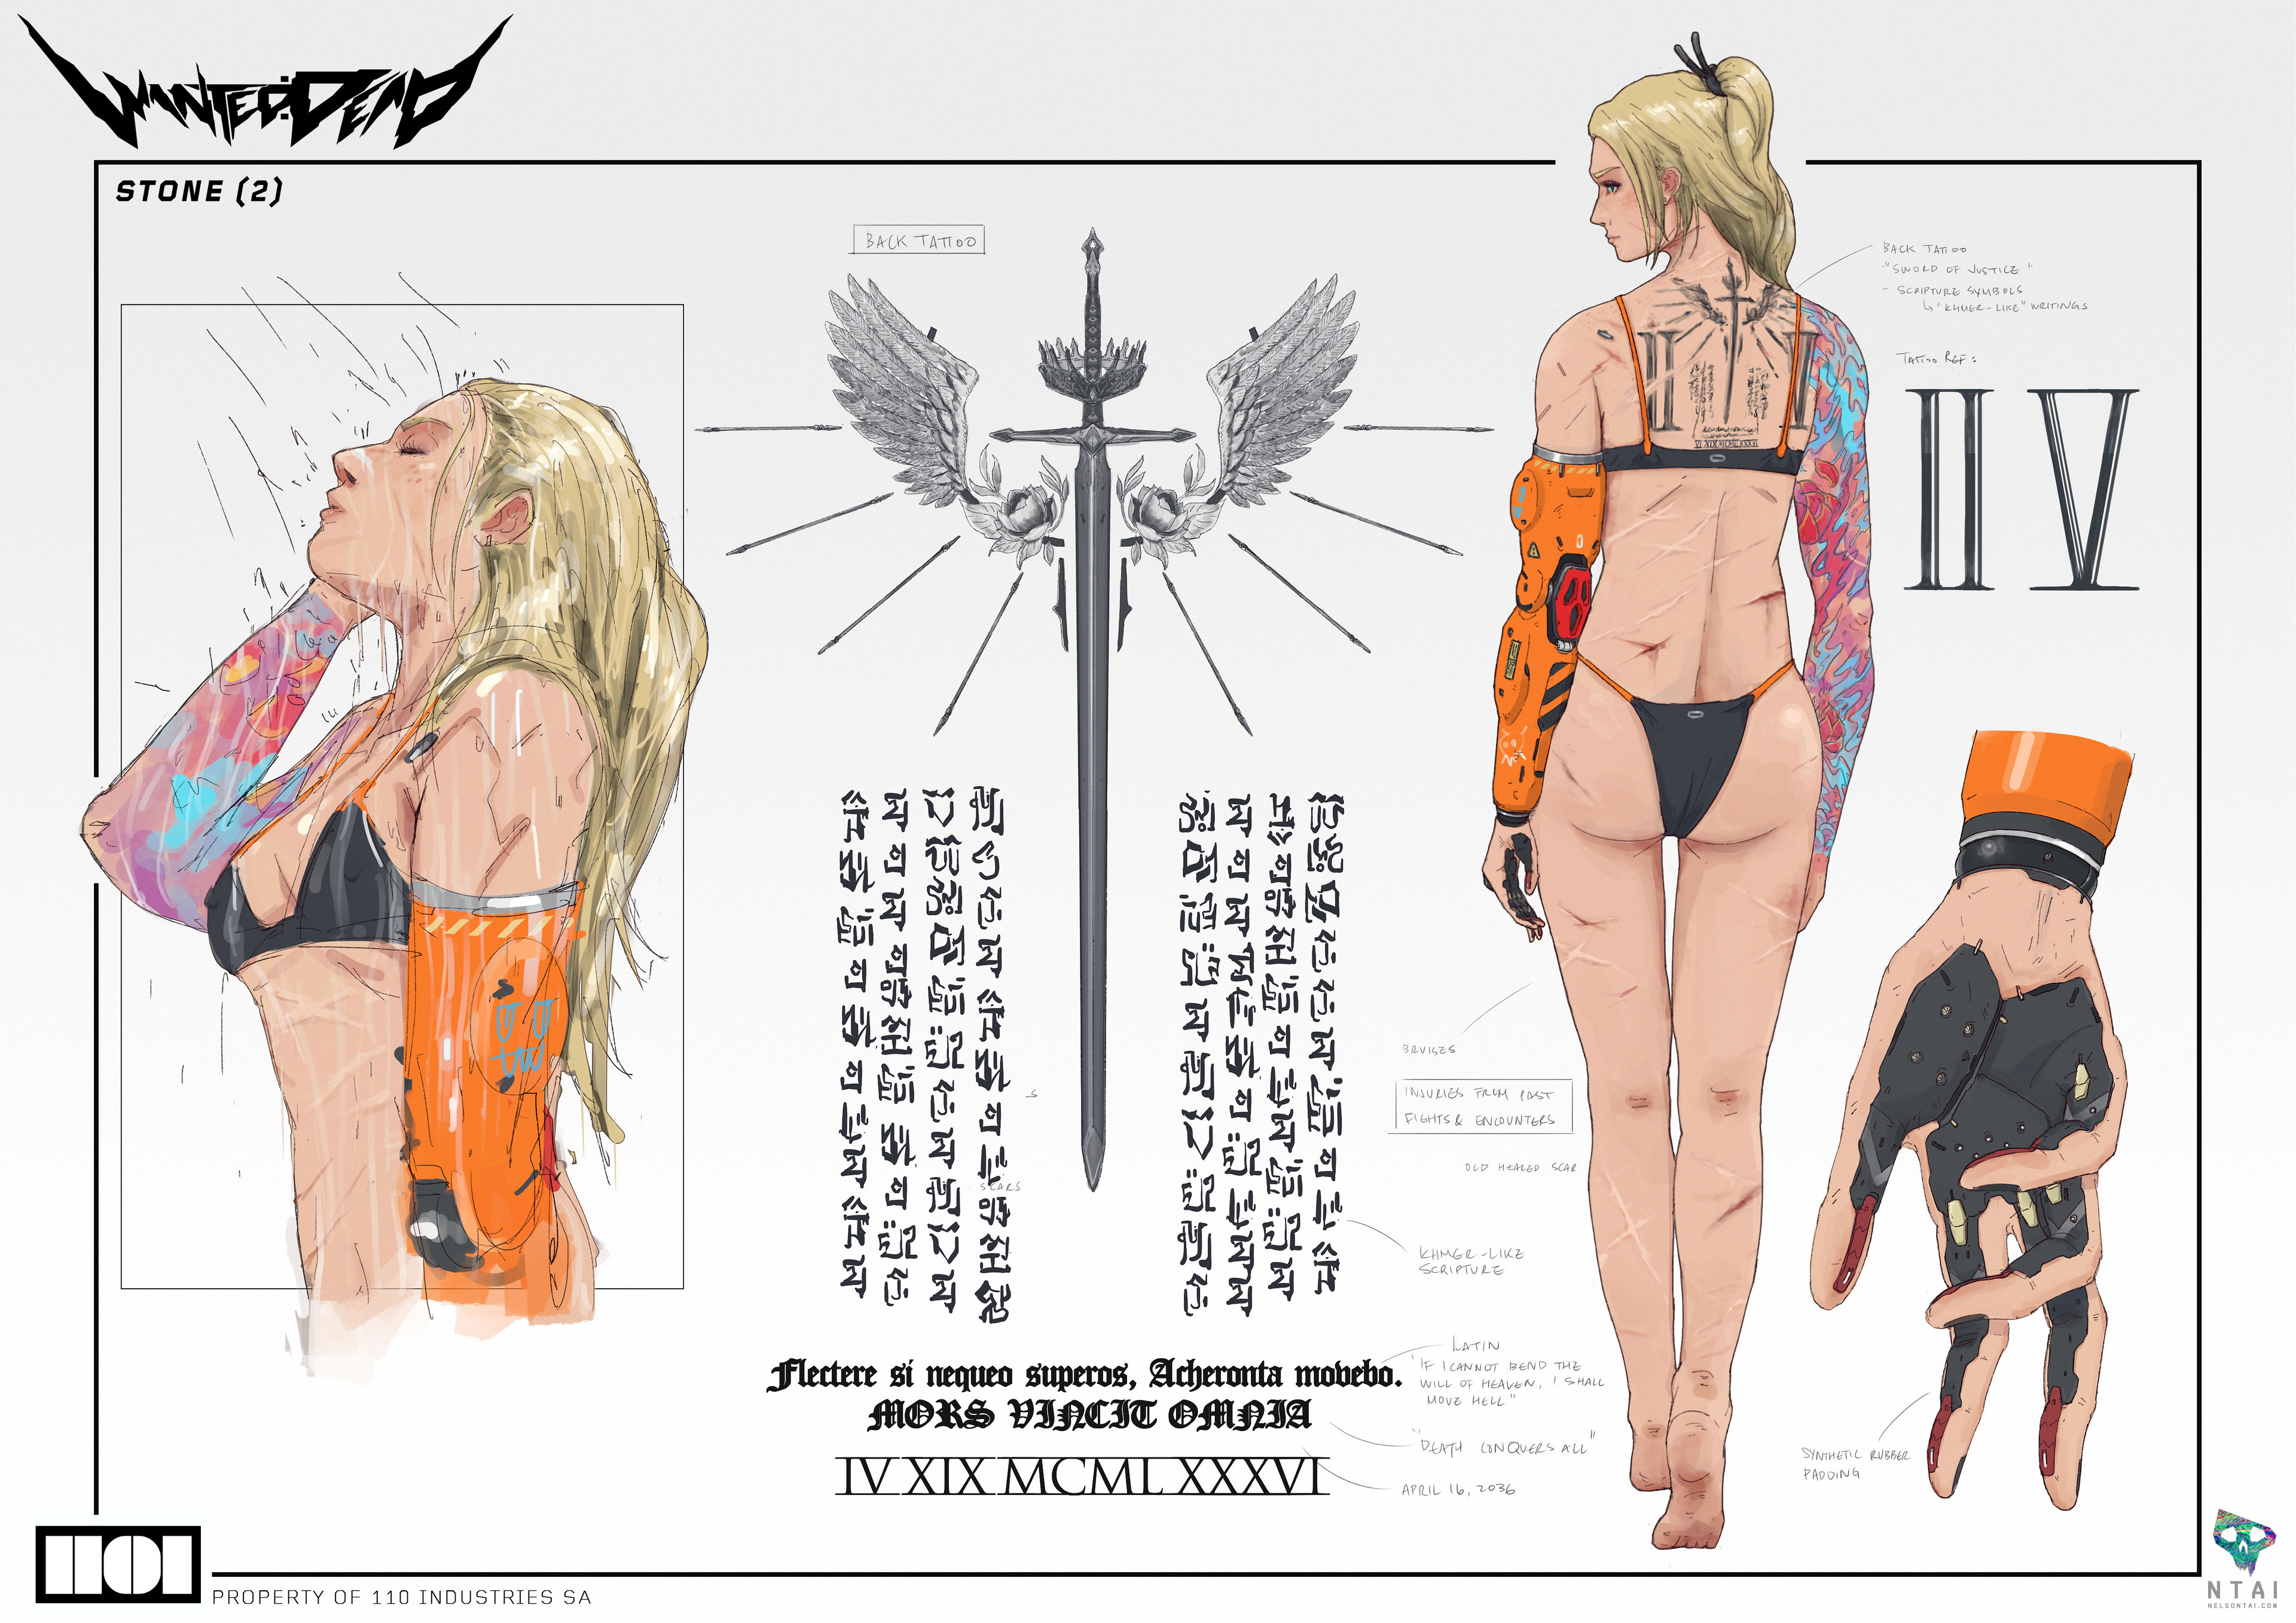 The Sword and Wings tattoo on her back along with scripture. The enhanced hand illustration was used for the Collector's Edition box art.